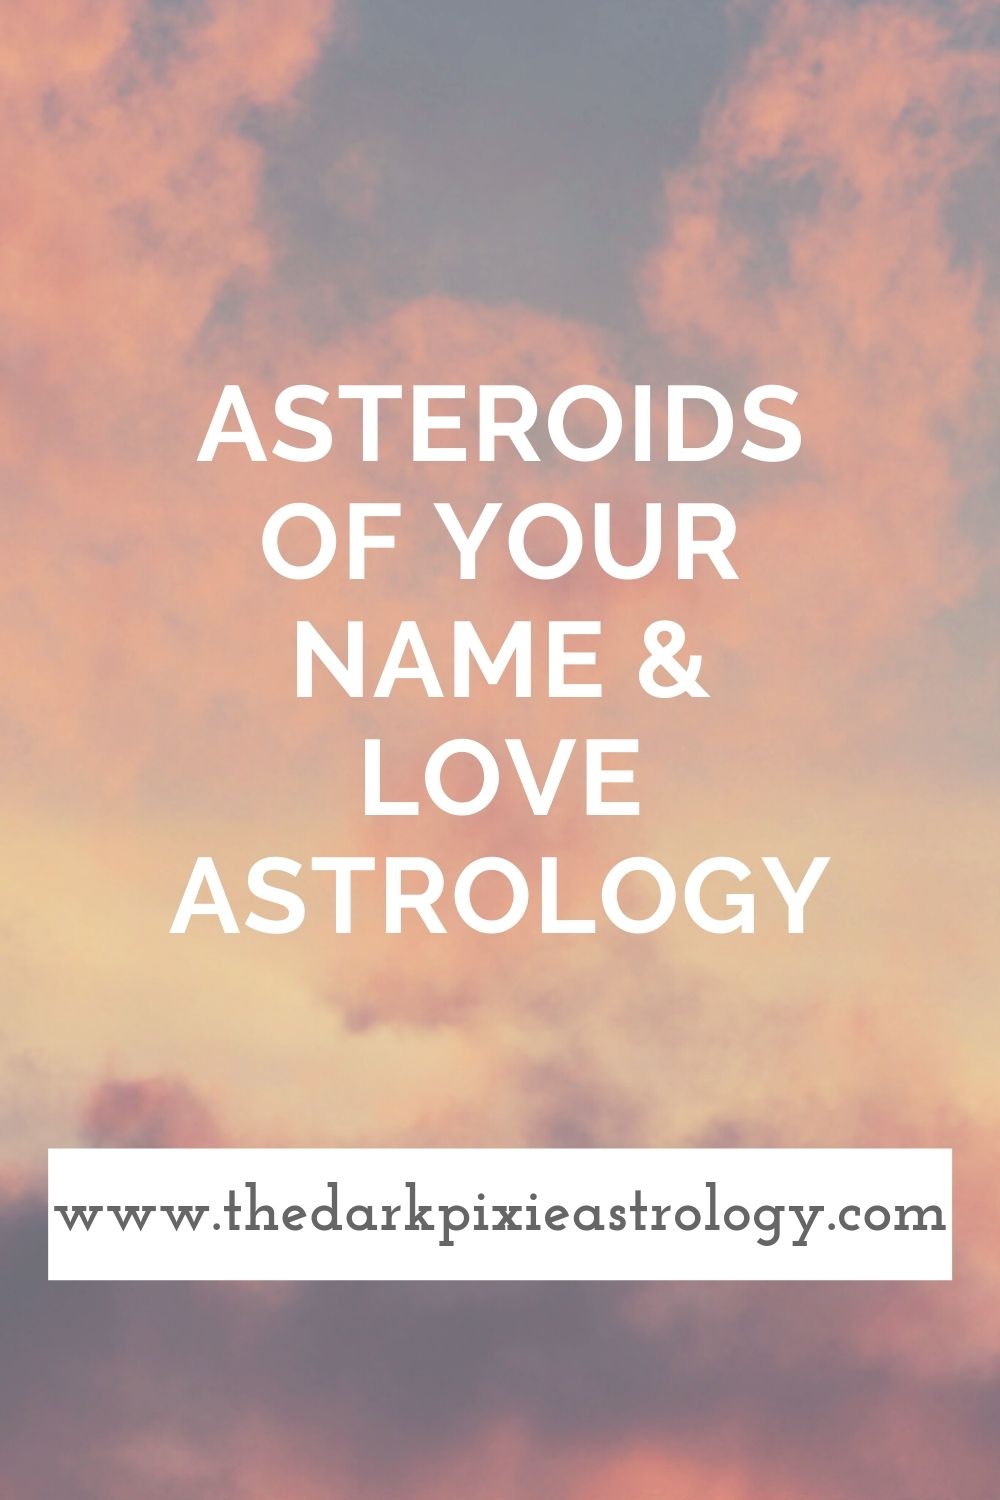 Asteroids of Your Name & Love Astrology - The Dark Pixie Astrology